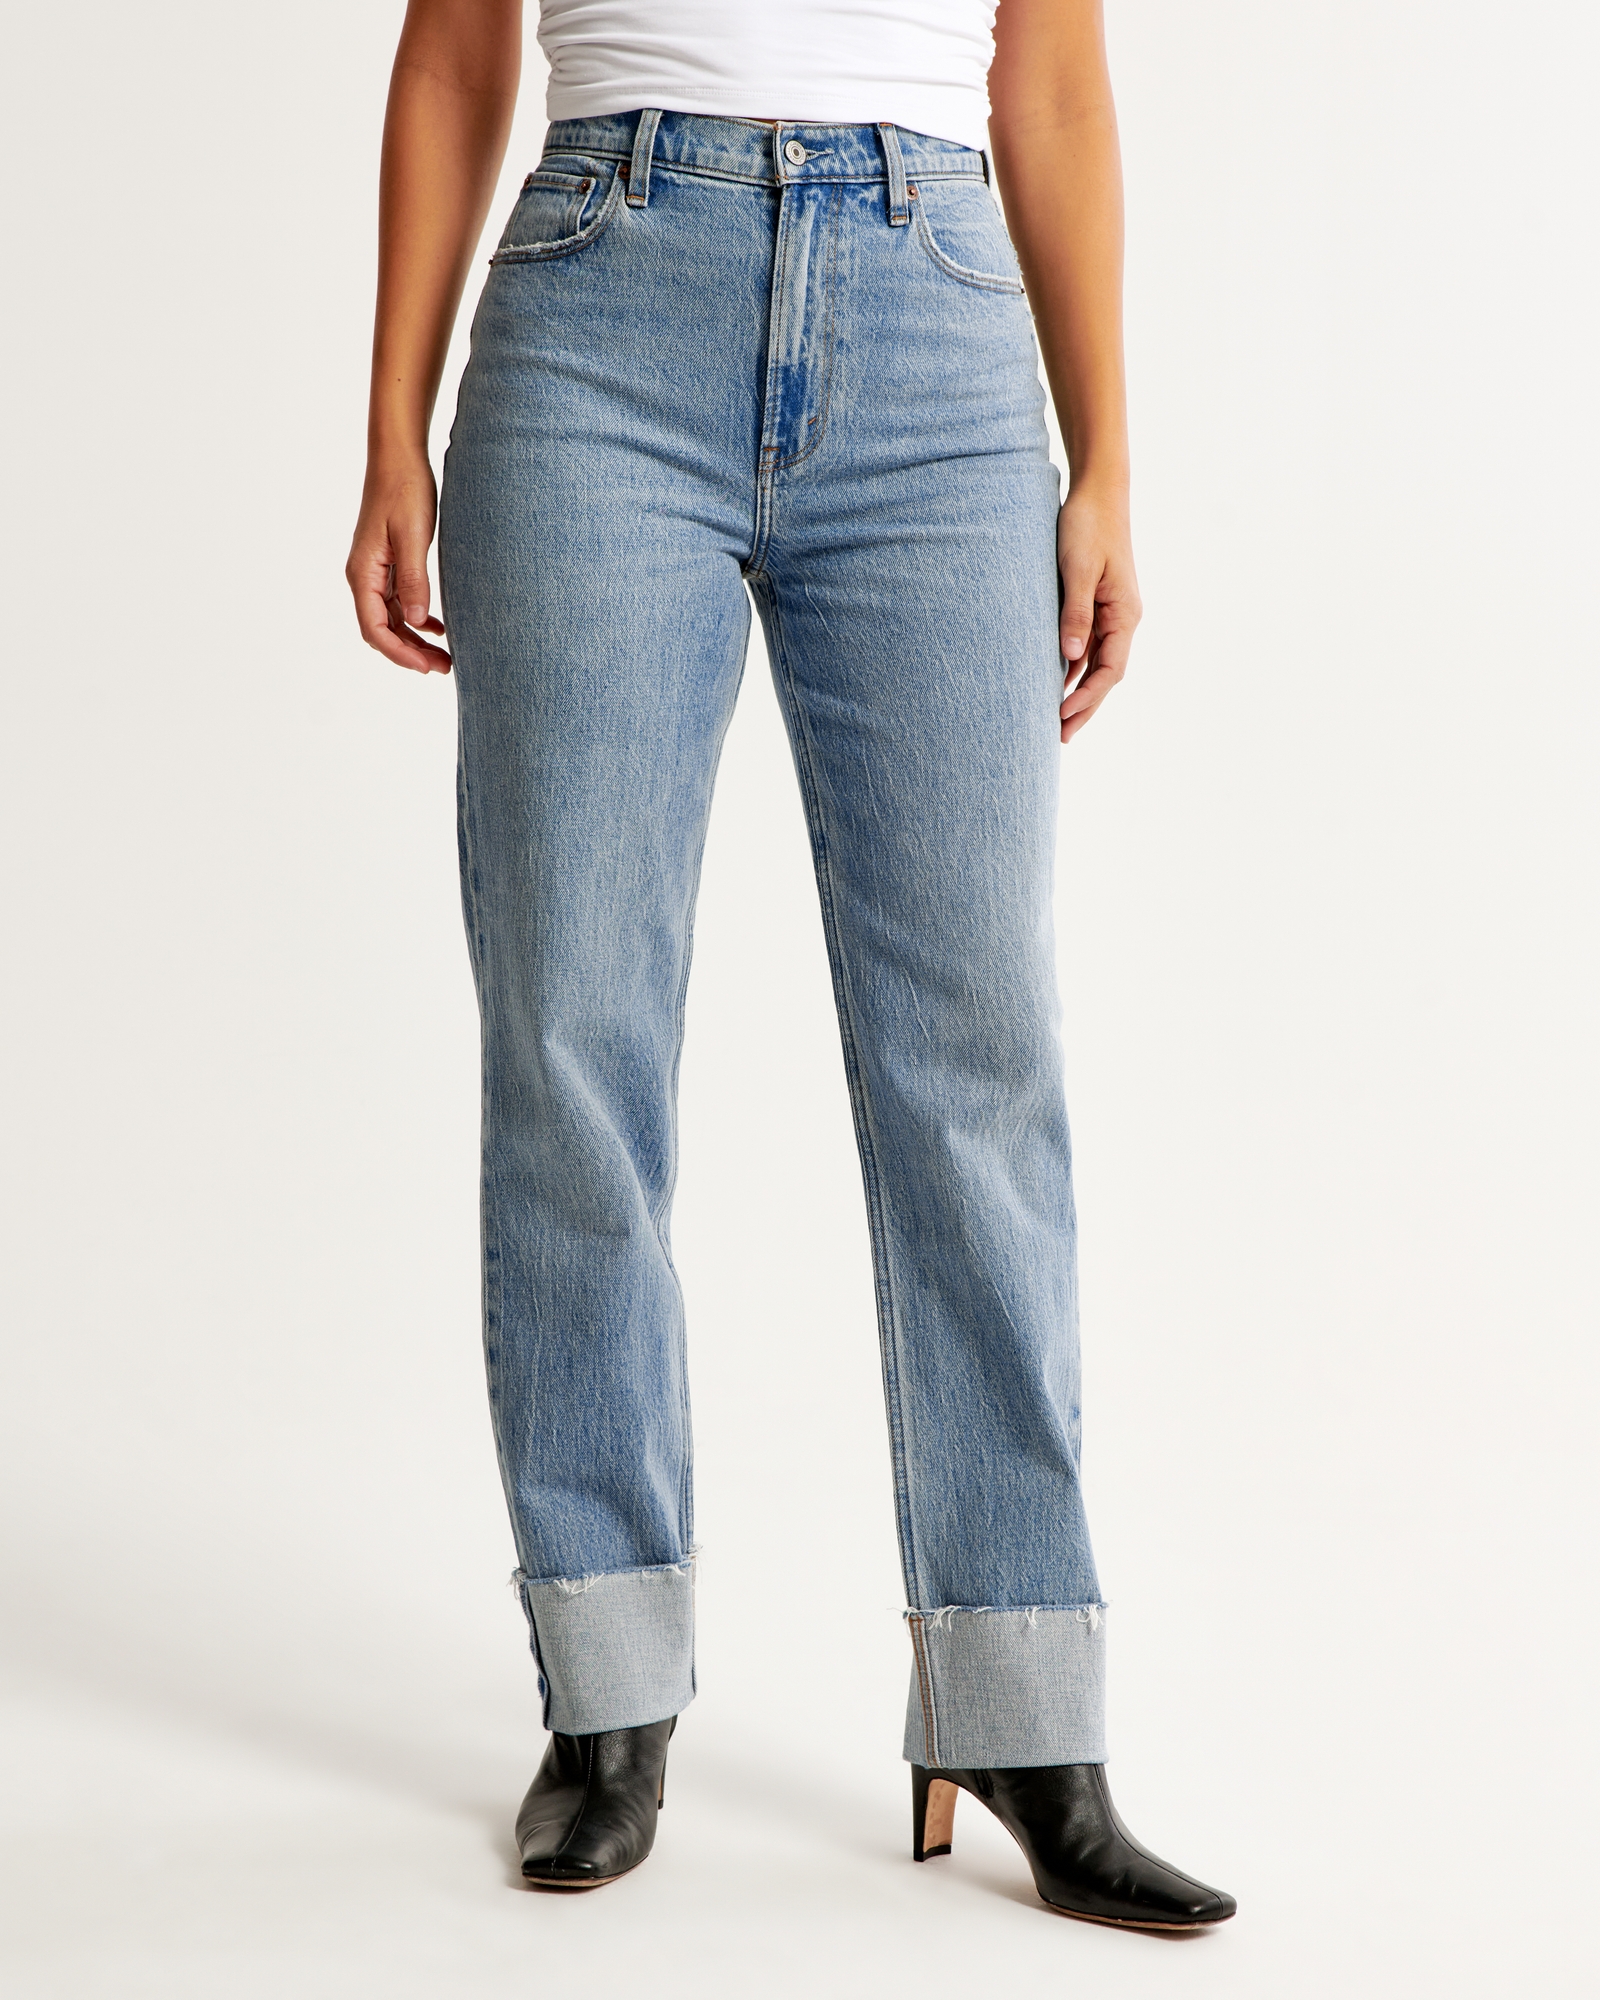 The 5 Denim Trends Crushing Skinny Jeans Right Now | Who What Wear